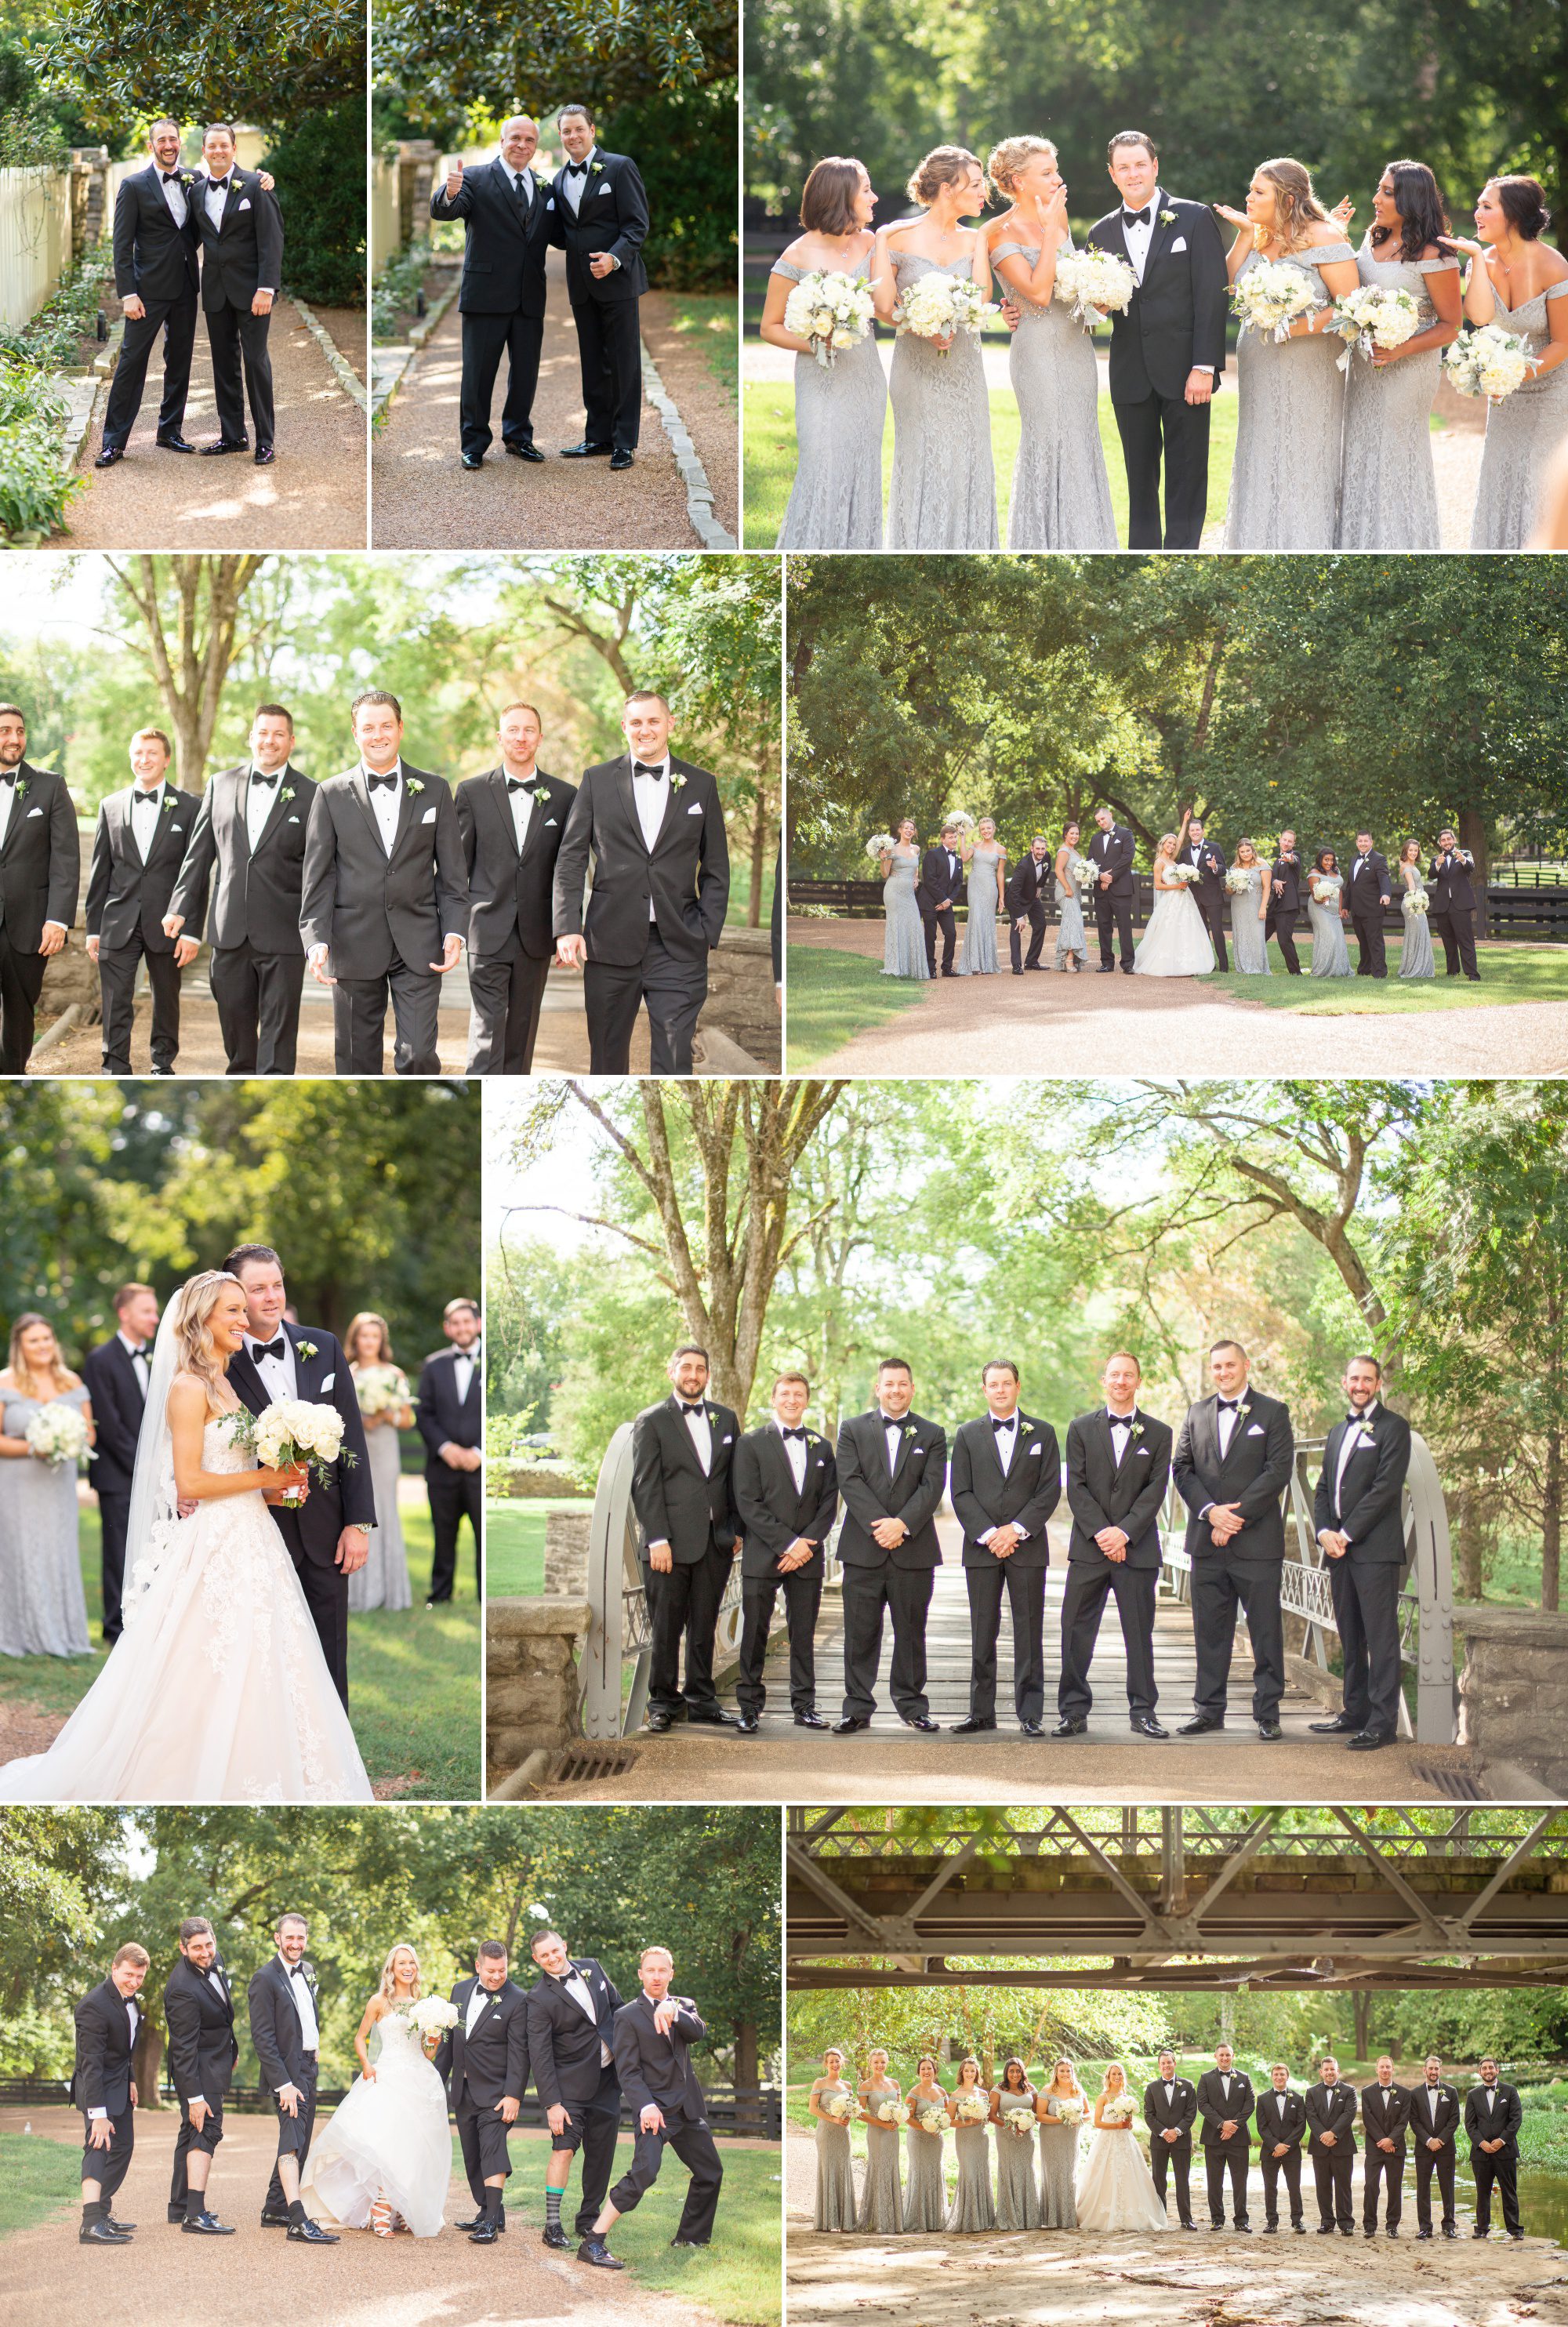 Bridal party walks around grounds to do portraits before wedding ceremony and reception at Belle Meade Plantation in Nashville, TN. Photos by Krista Lee Photography 